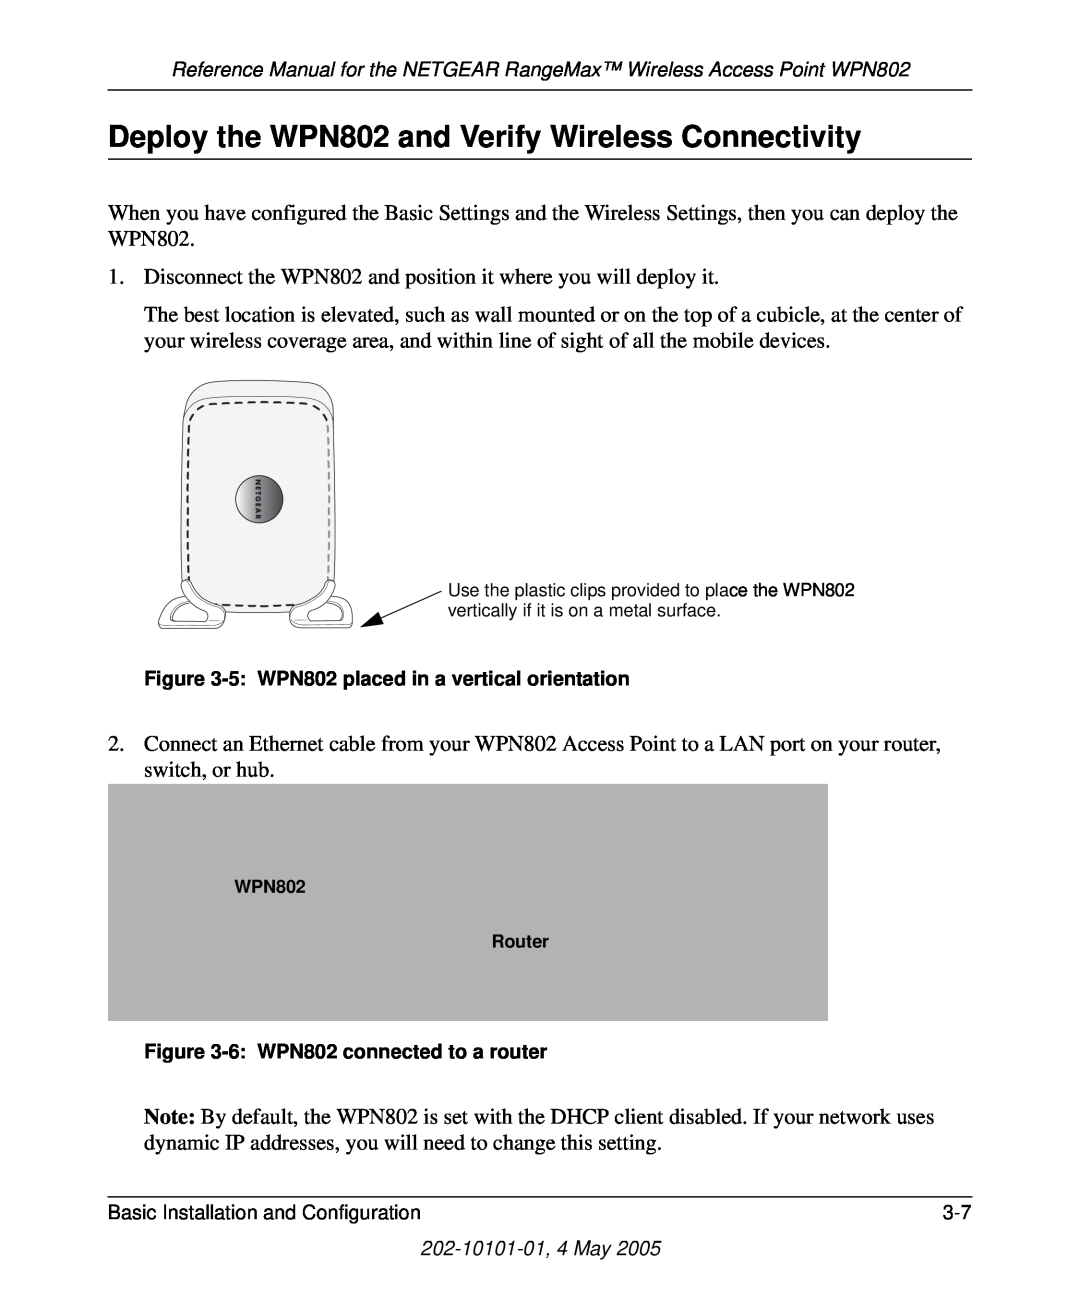 NETGEAR manual Deploy the WPN802 and Verify Wireless Connectivity 